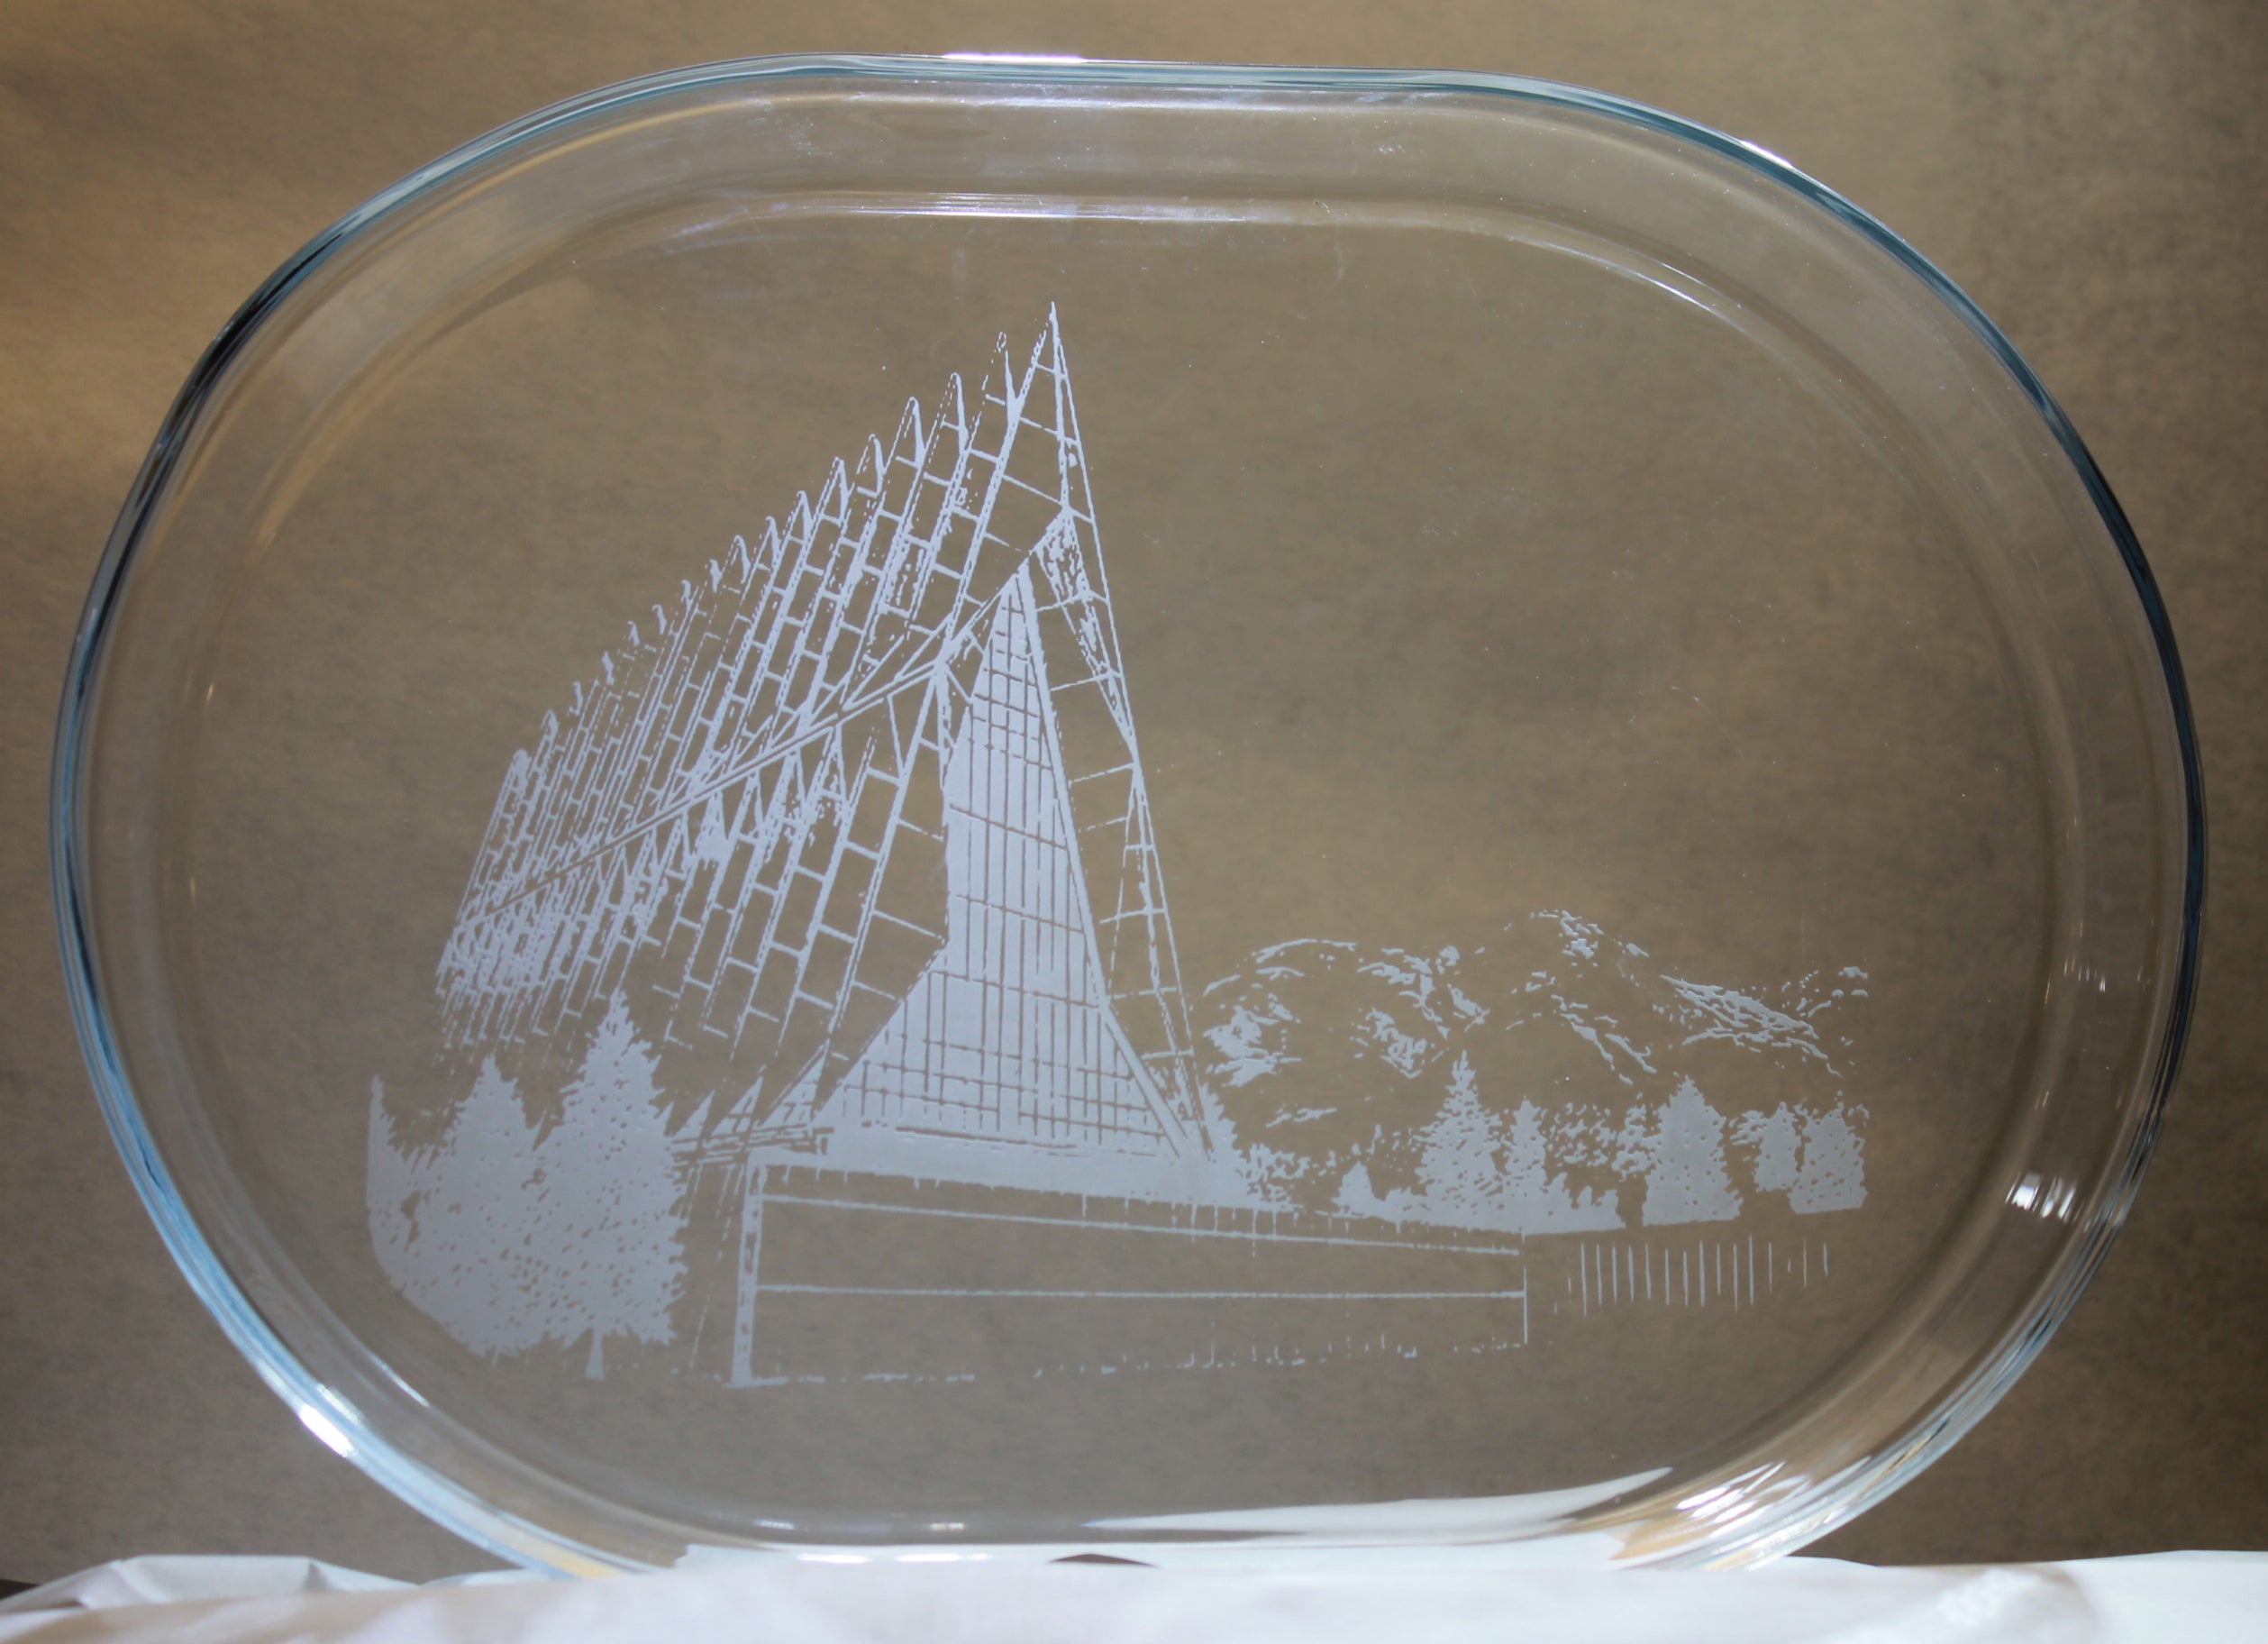 USAFA Chapel Image sand-carved clear glass serving tray platter - Samstagsandmore